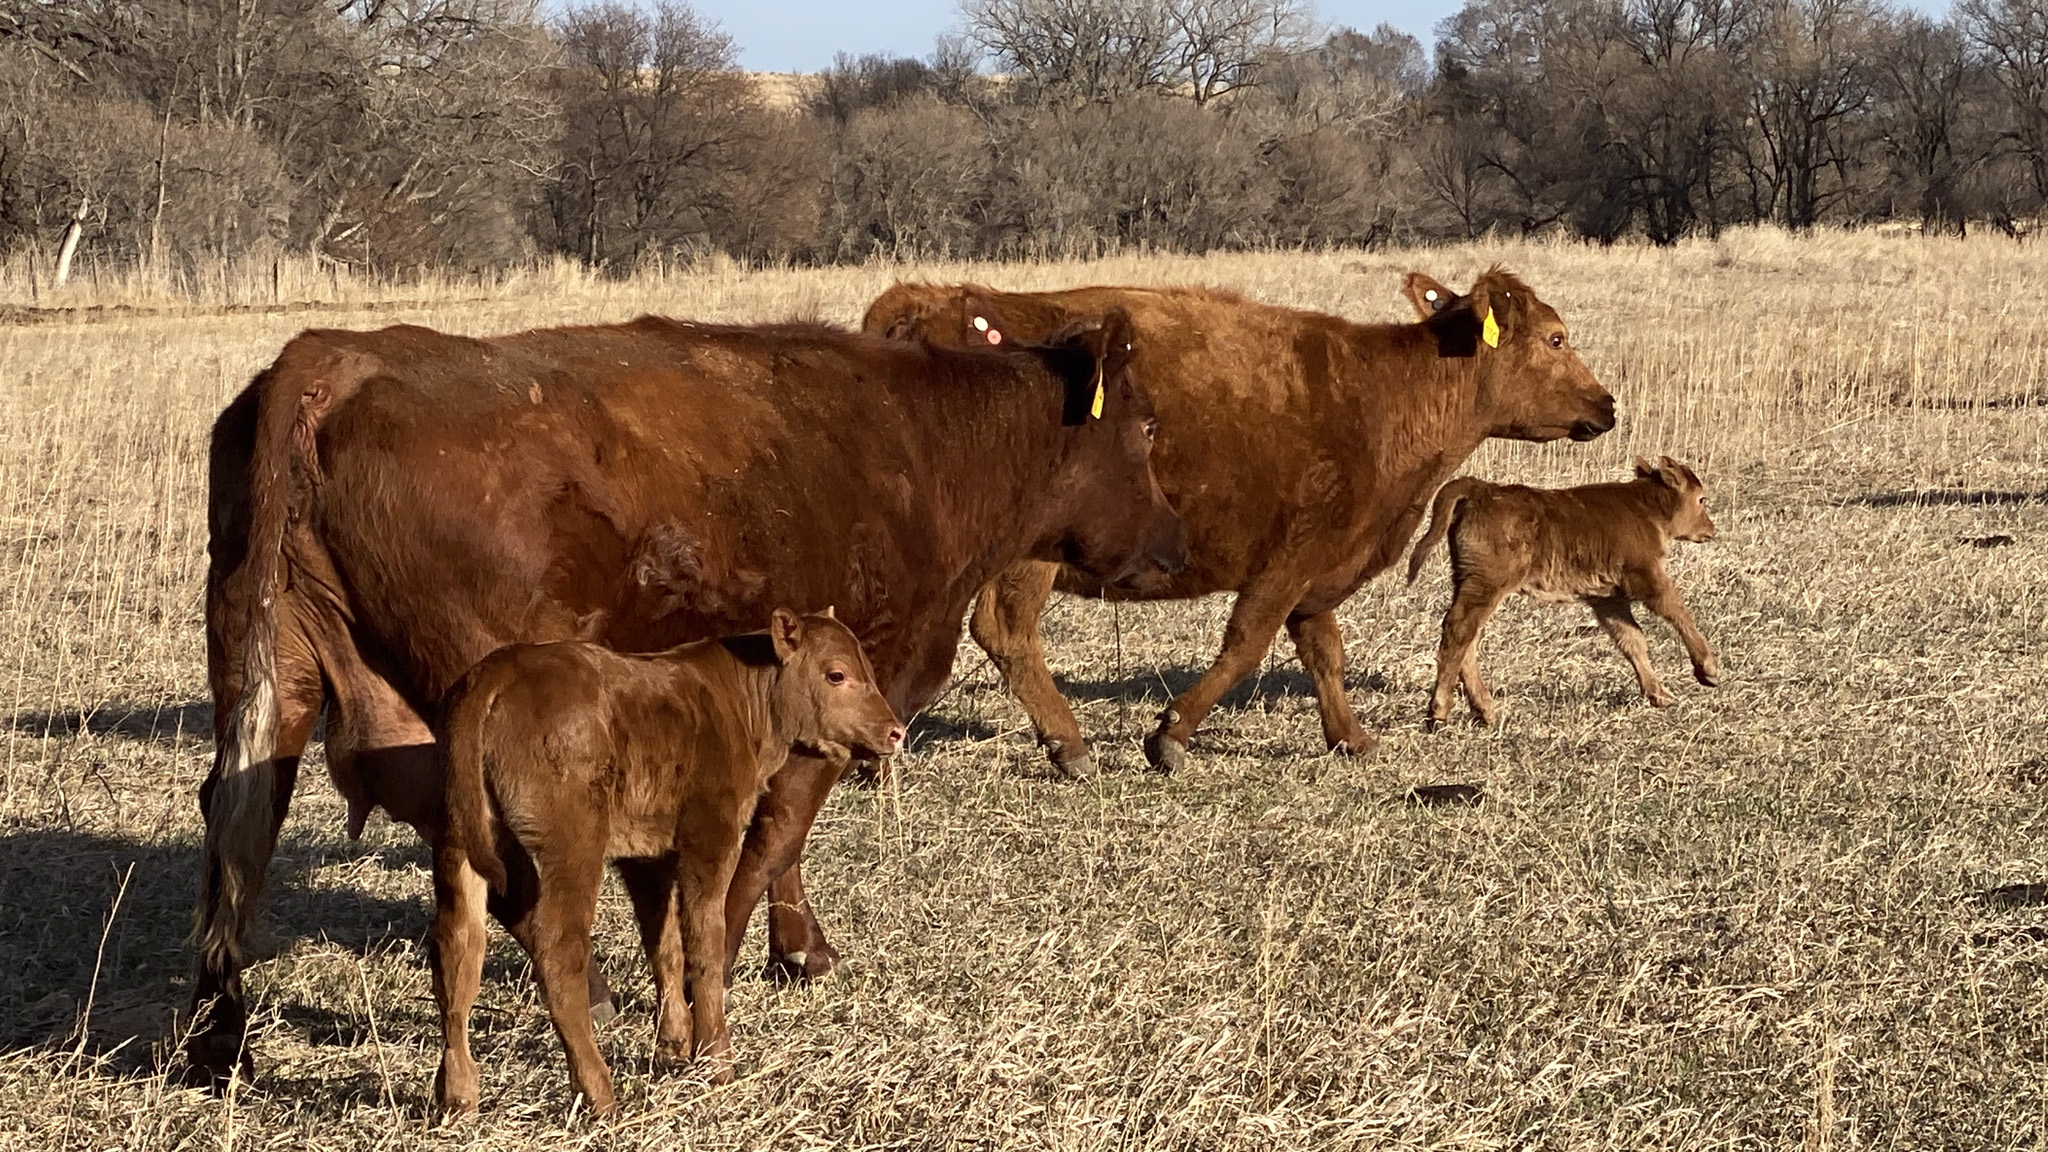 Spring calves and their mothers at the NCTA Aggieland pasture located north of campus. (Annie Bassett, NCTA student photographer)